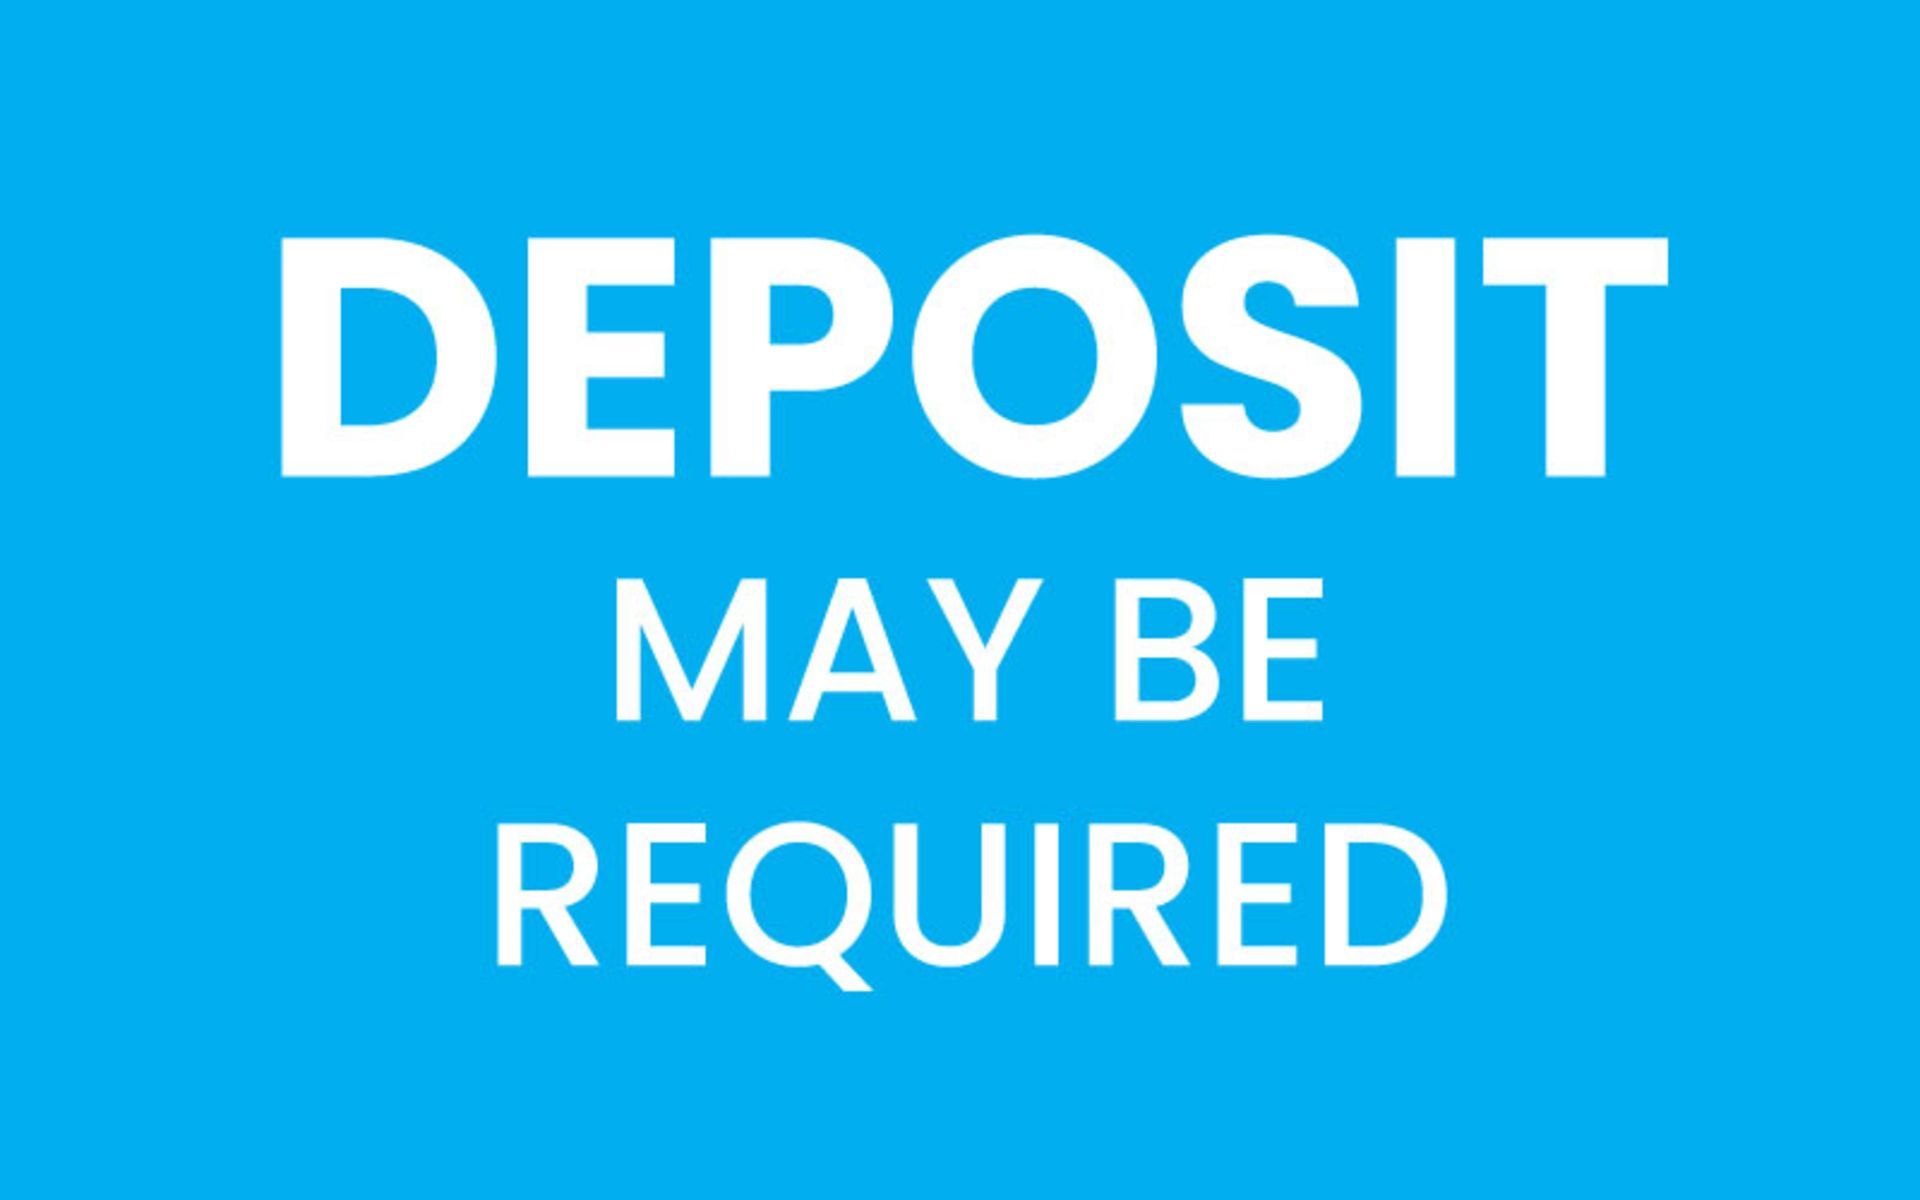 Buyers residing outside the U.S.A. or Canada, will be required to send a $2,000.00 deposit